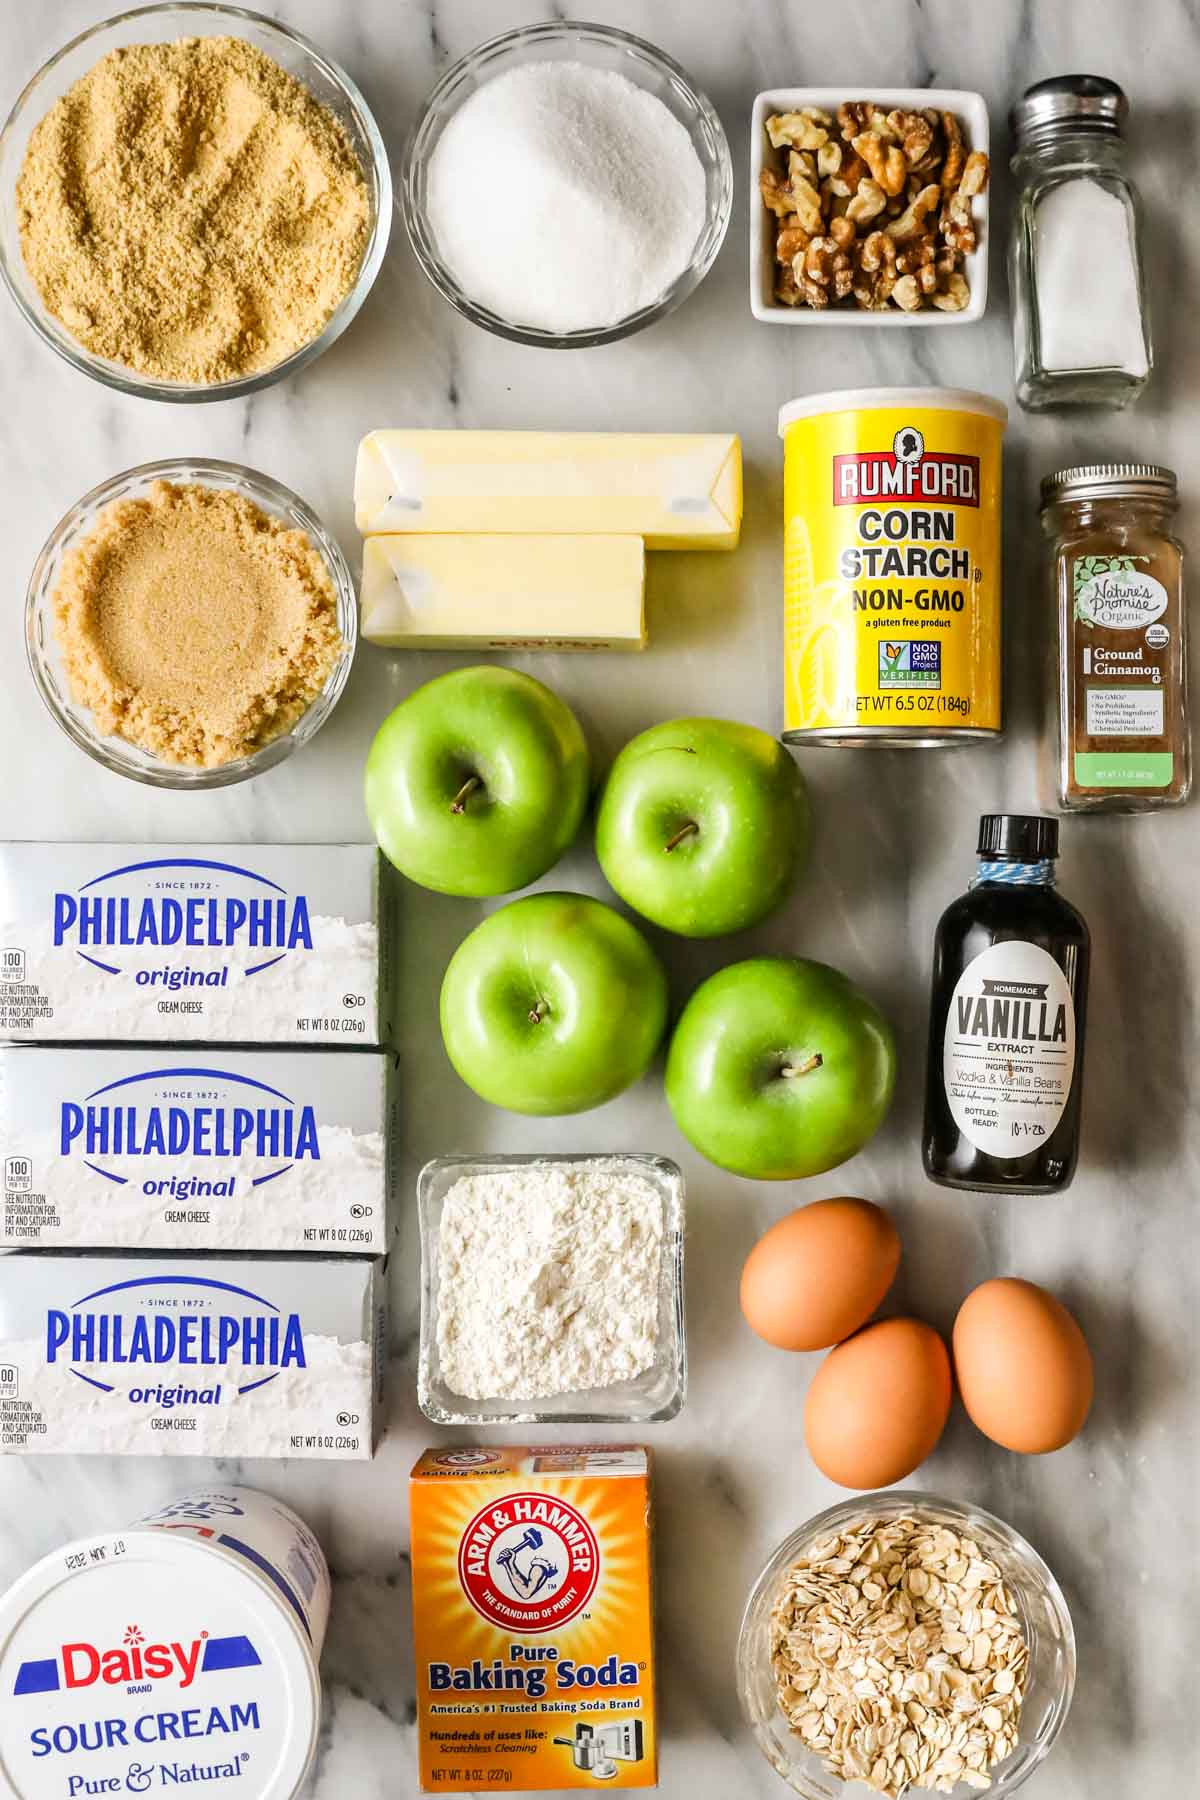 Overhead view of ingredients including apples, brown sugar, walnuts, cream cheese, and more.